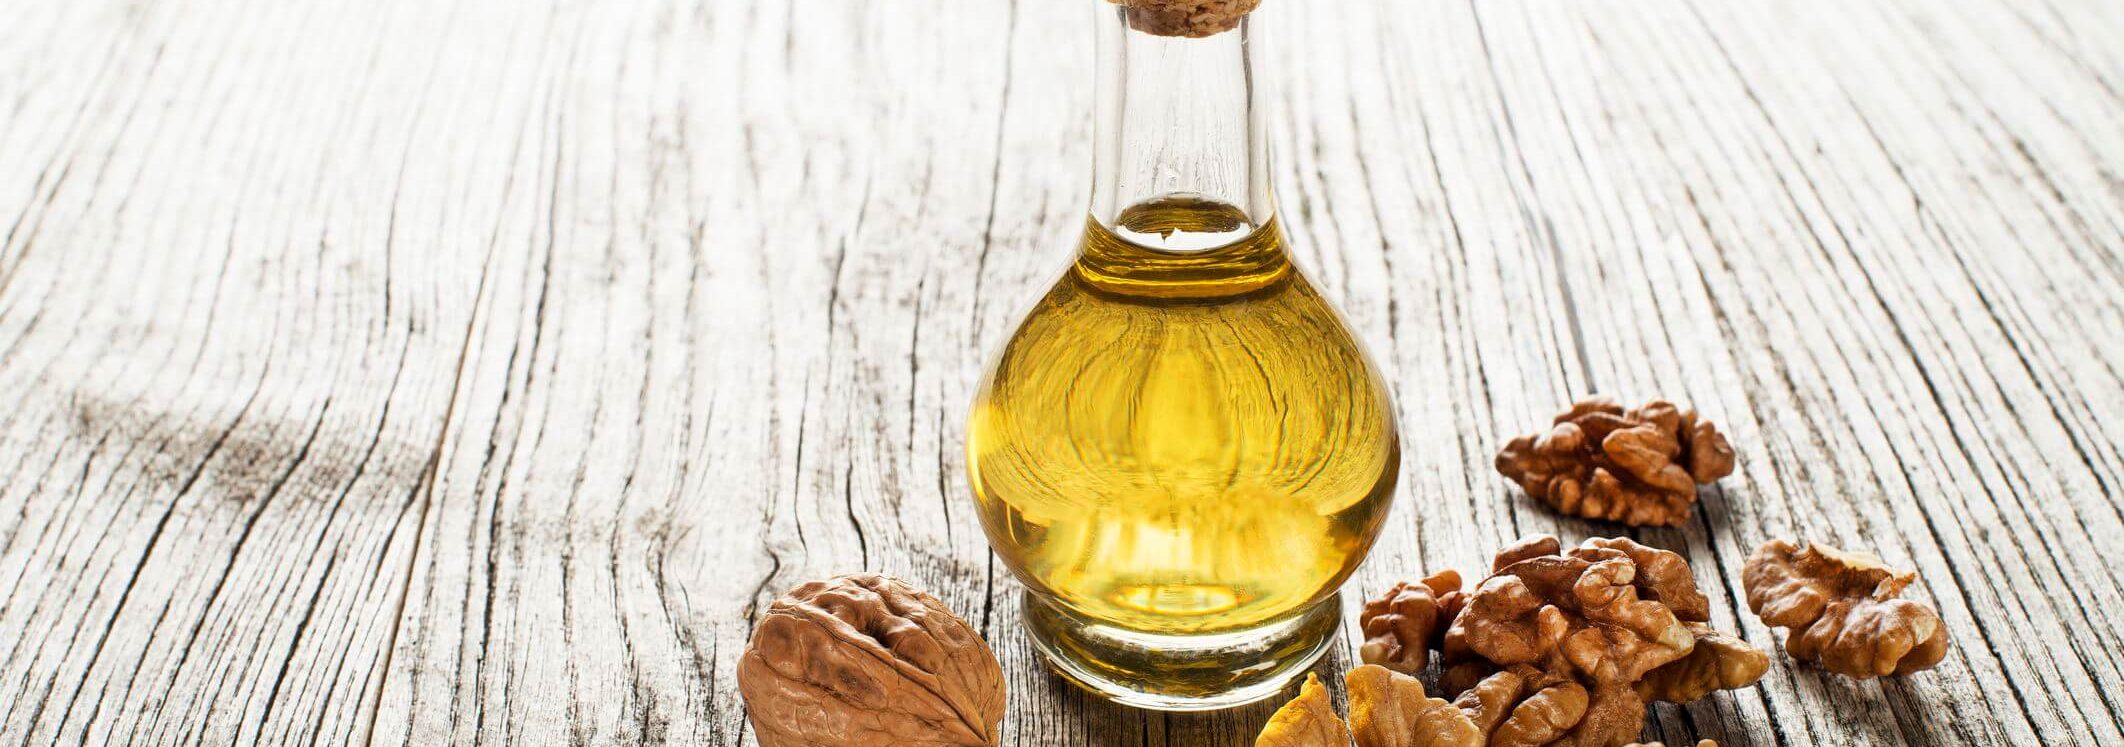 How Does Walnut Oil Work For Your Hair?